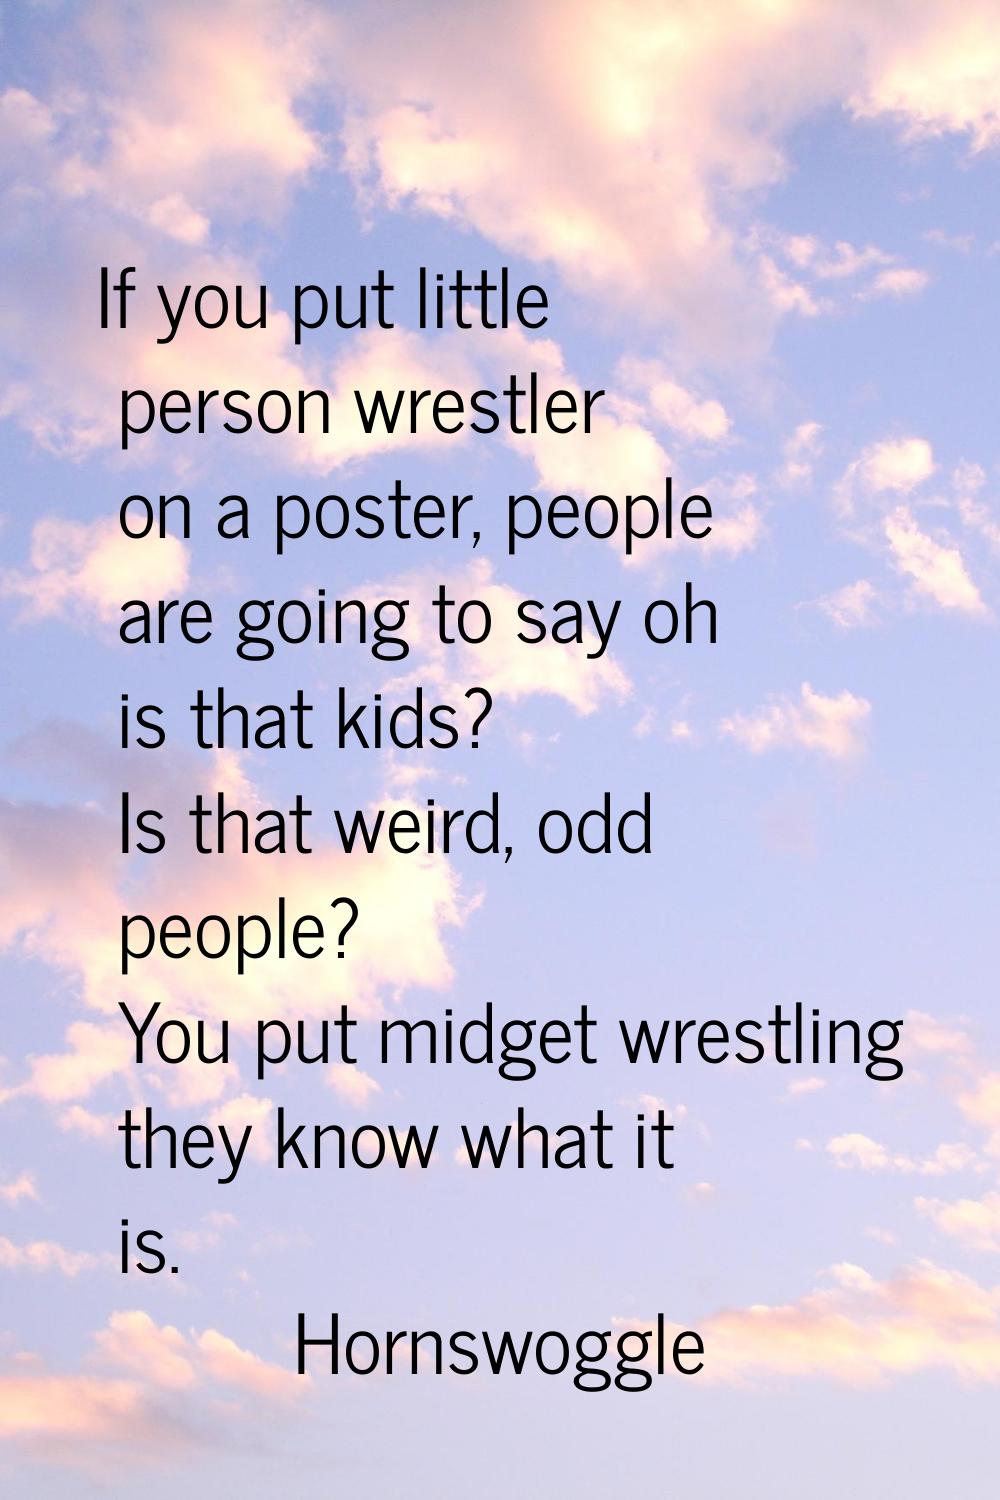 If you put little person wrestler on a poster, people are going to say oh is that kids? Is that wei